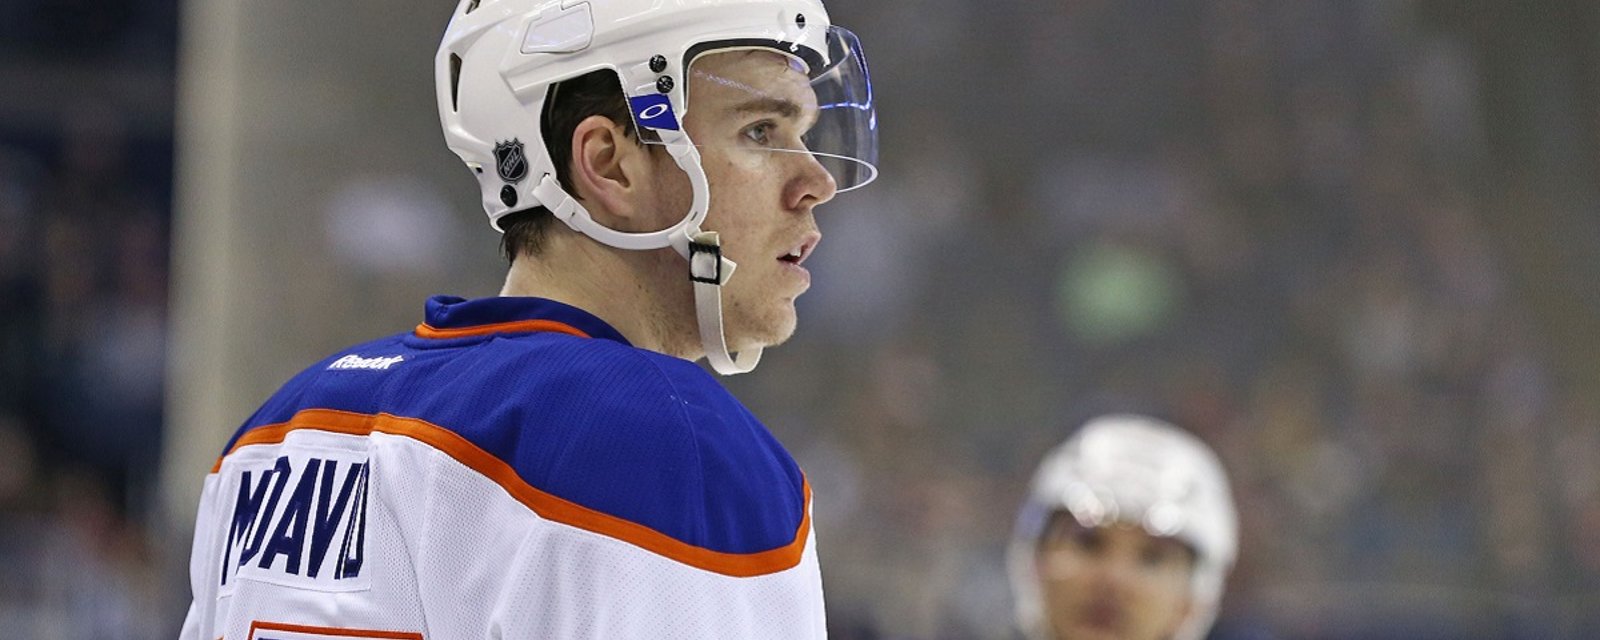 Breaking: Preliminary update on Connor McDavid is a very good sign!